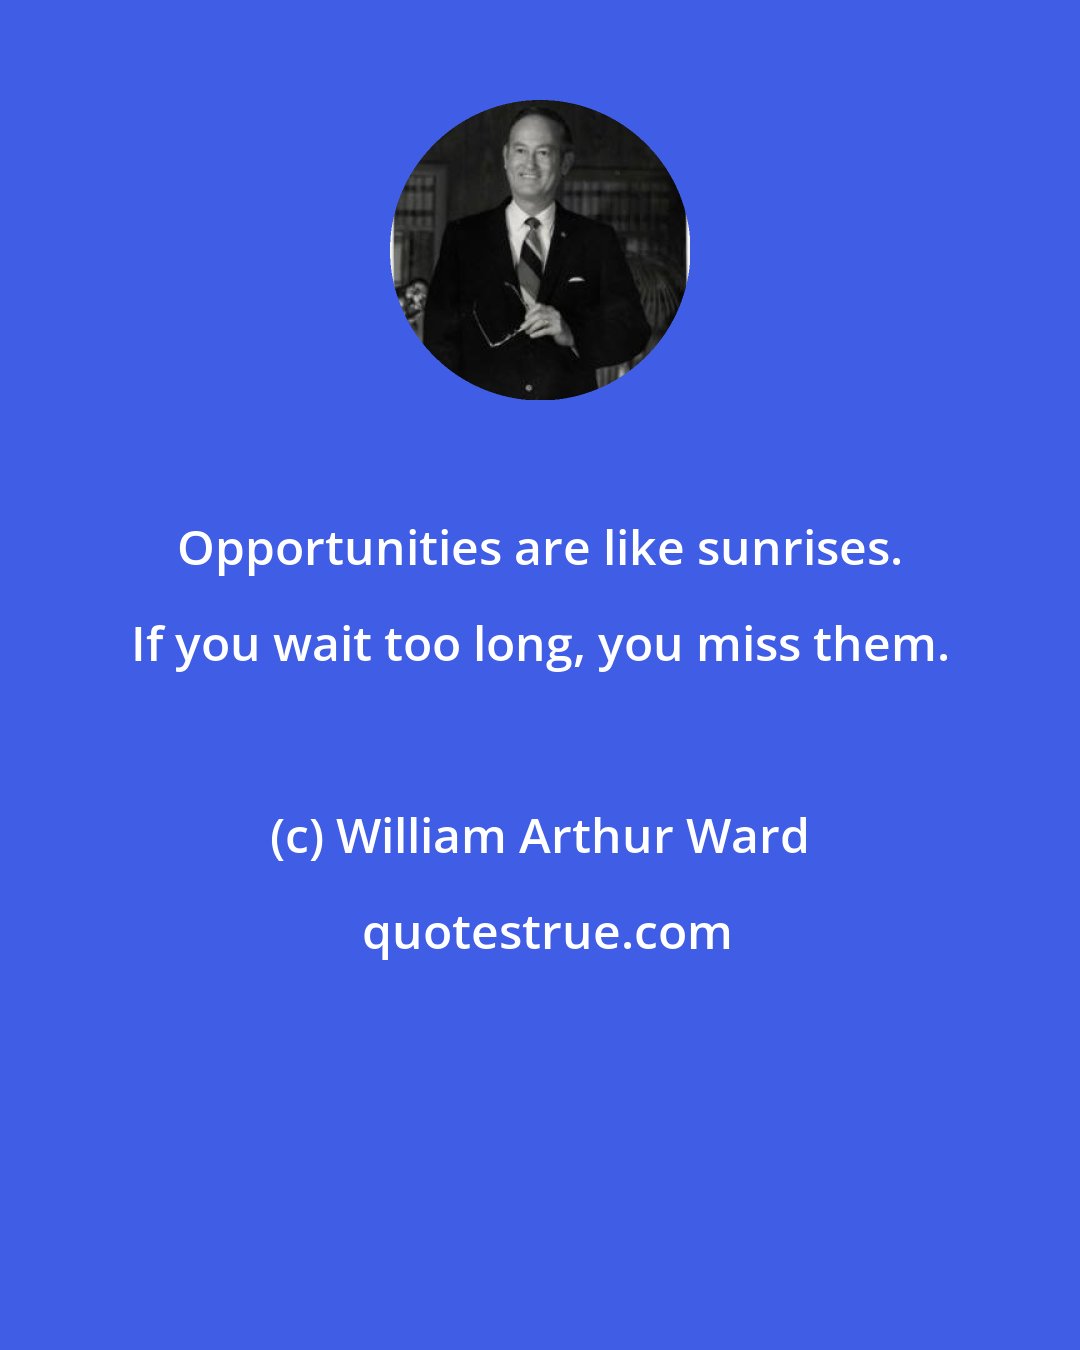 William Arthur Ward: Opportunities are like sunrises. If you wait too long, you miss them.